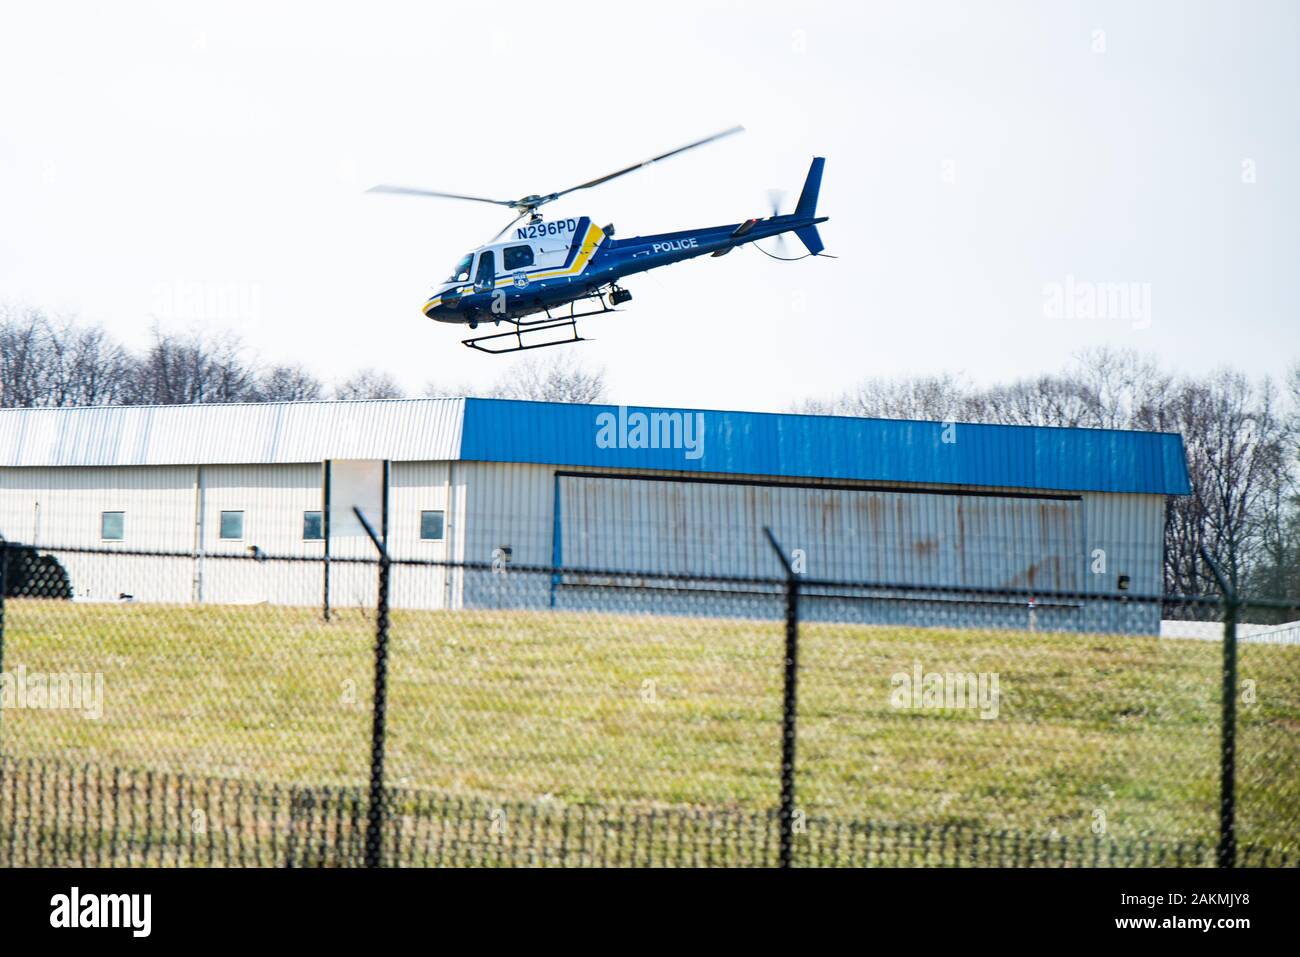 Philadelphia PA / USA. A police helicopter takes off from Northeast Philadelphia airport. January 09, 2020. Credit: Chris Baker Evens. Stock Photo